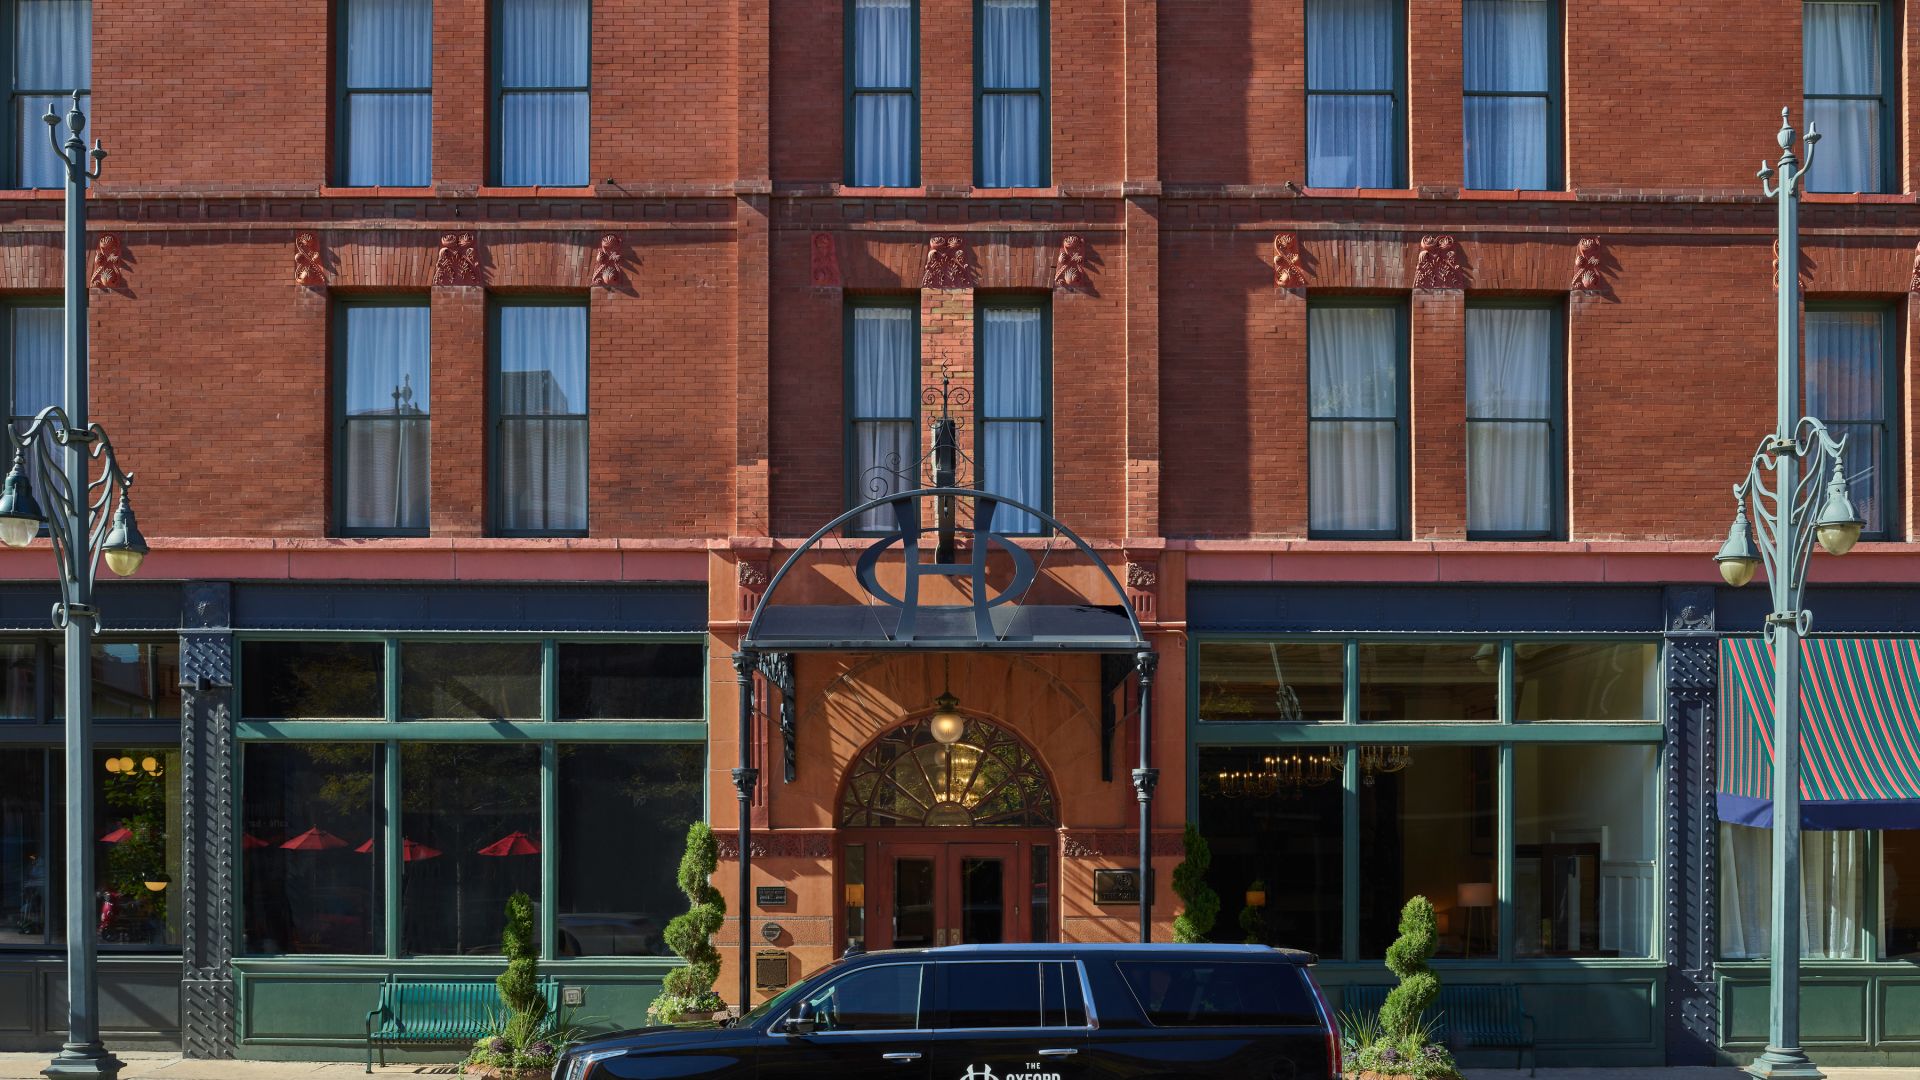 The Oxford Facade - The Oxford branded Cadillac Escalade in front of the historic Red Brick Building